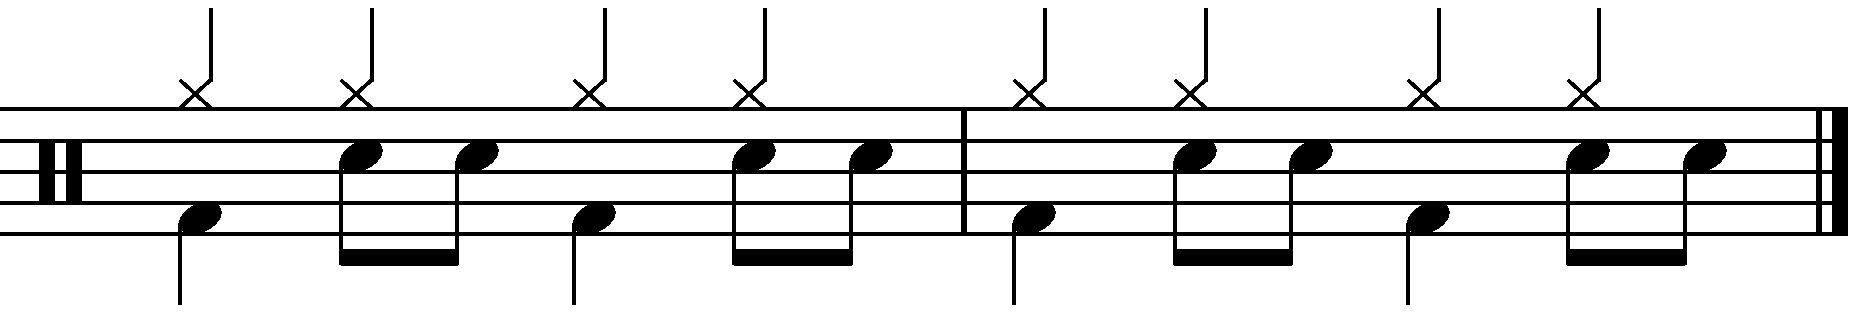 2 Bar Grooves - Example 1g